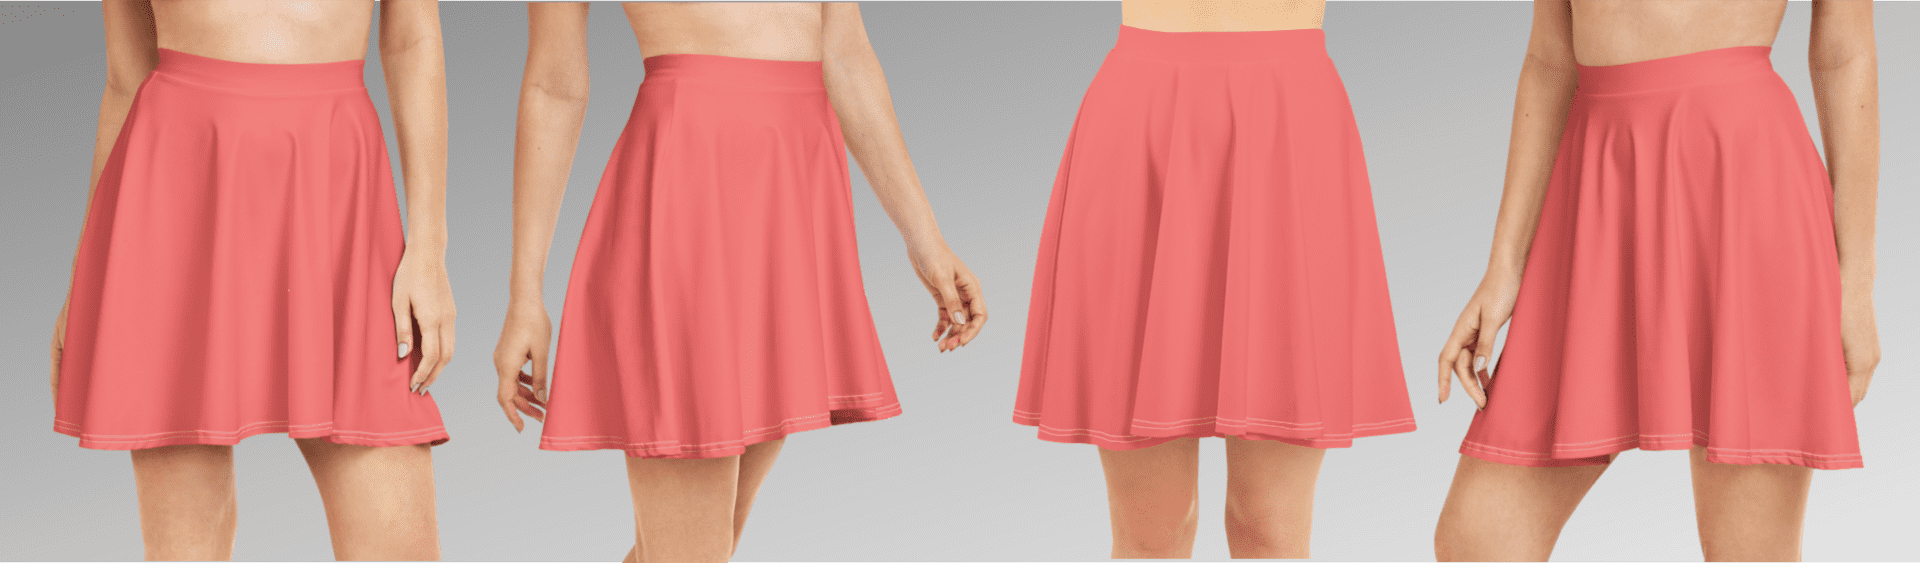 Coral skater skirt with white stitching.